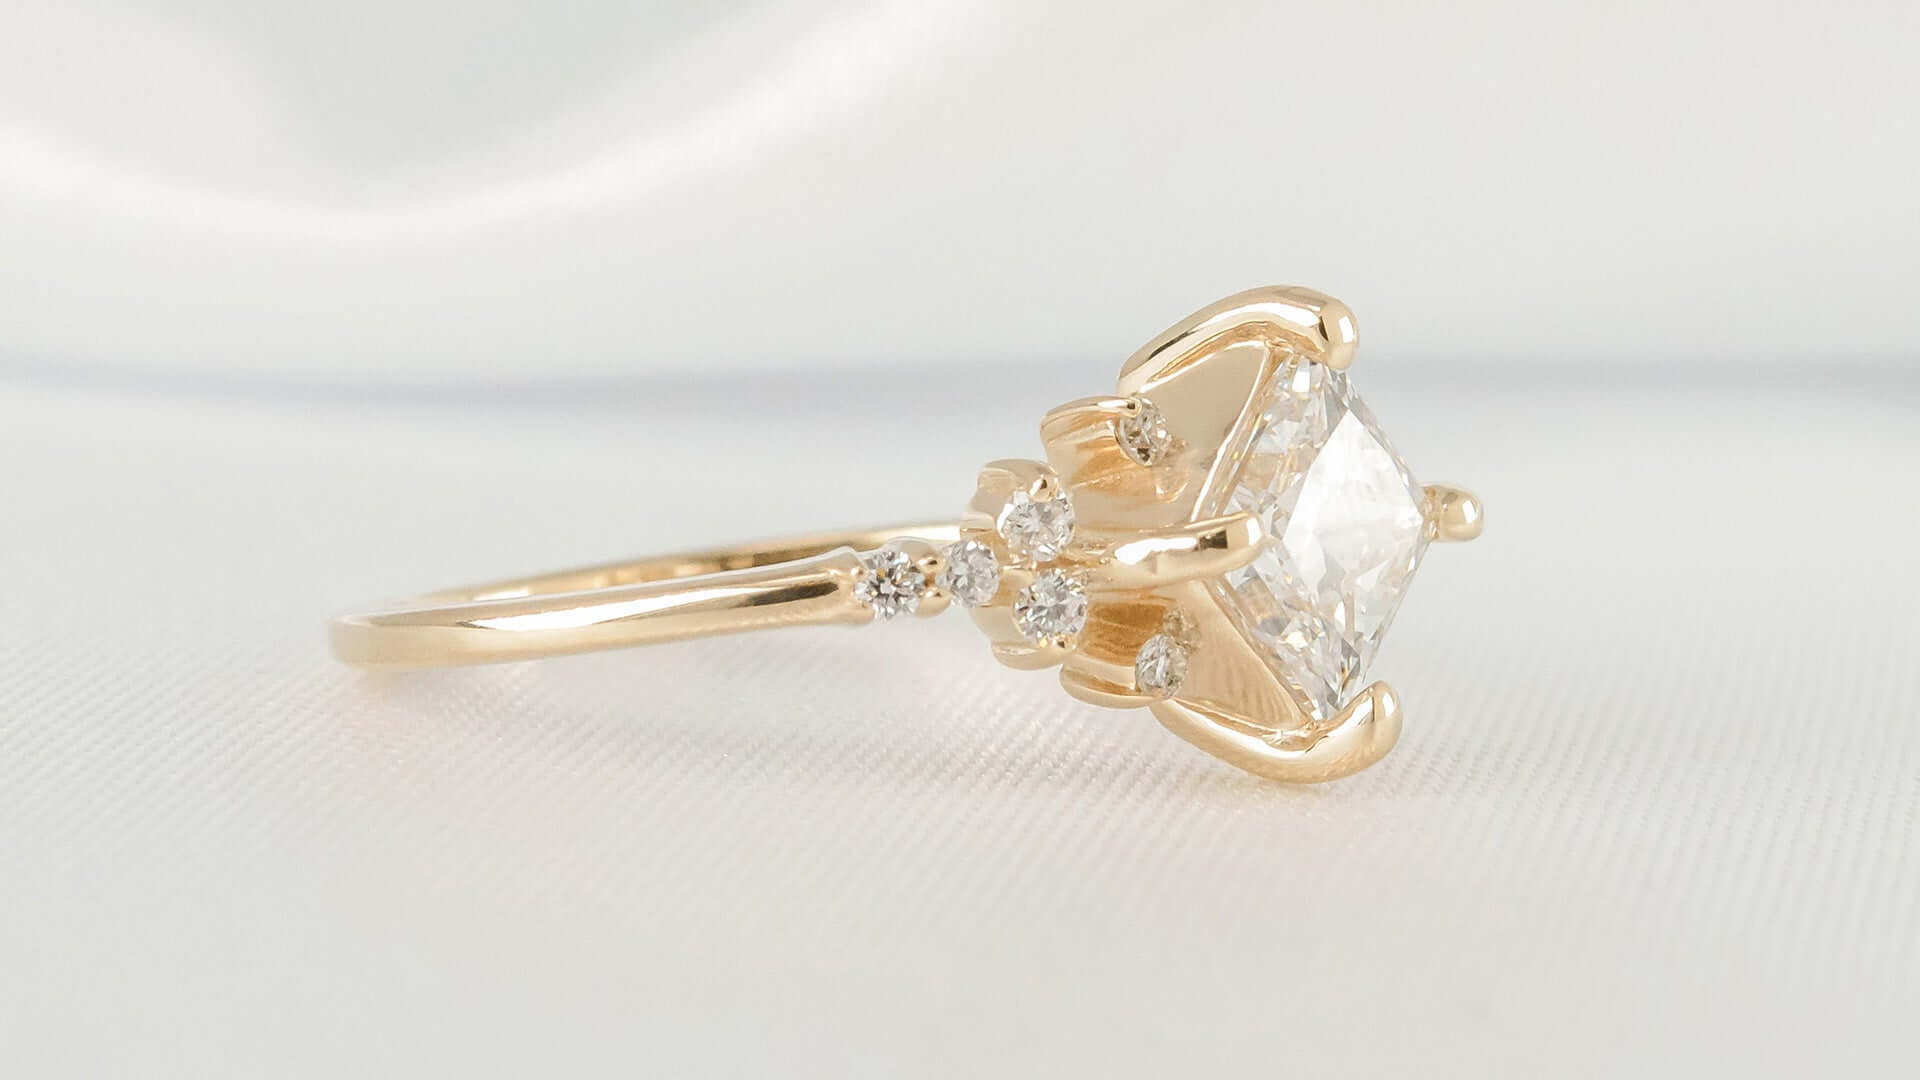 Delicate Engagement Rings Evoke An Understated Beauty, The Wedding Ring  Shop